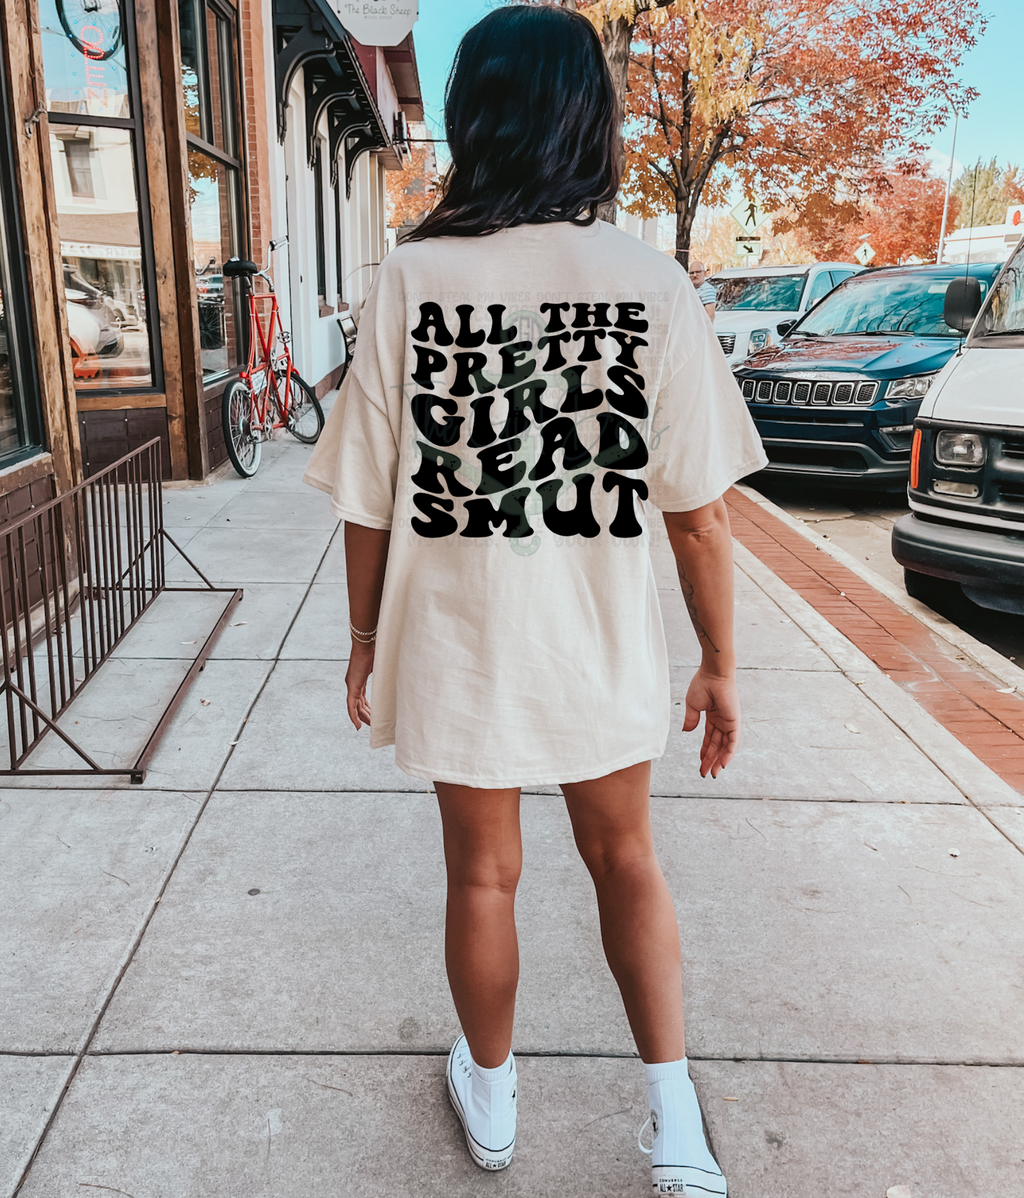 All The Pretty Girls Read Smut (Front & Back) Top Design